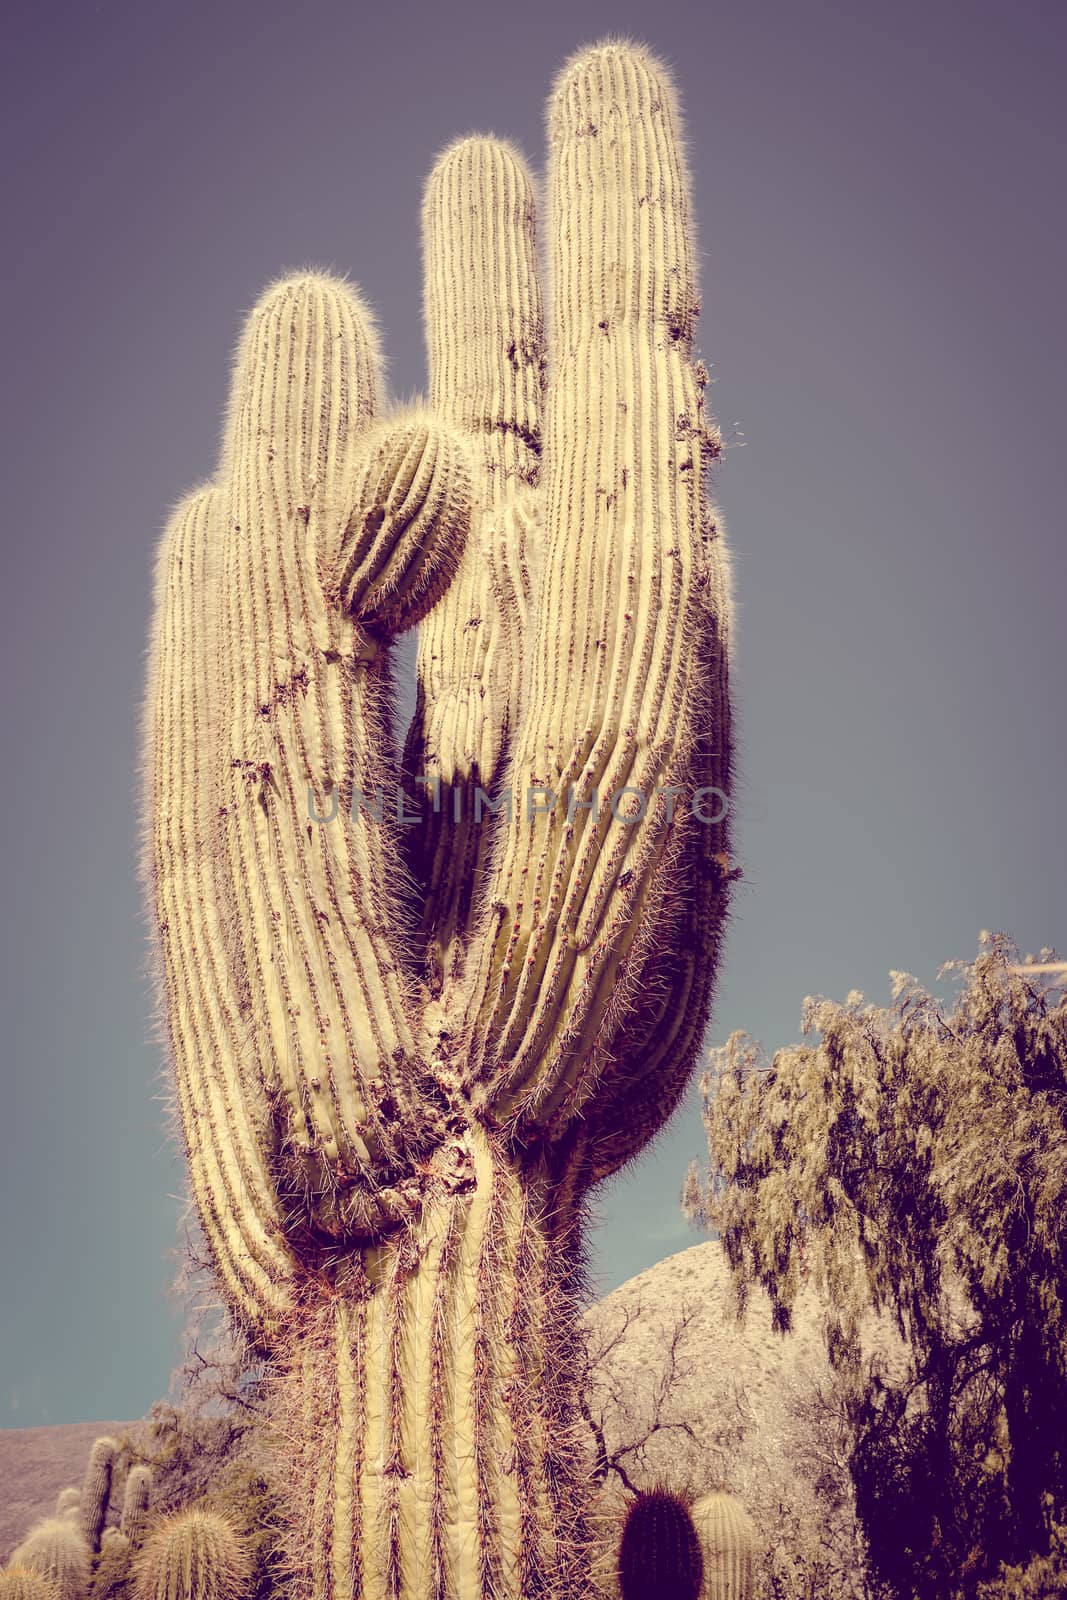 giant cactus in the desert, Argentina by daboost